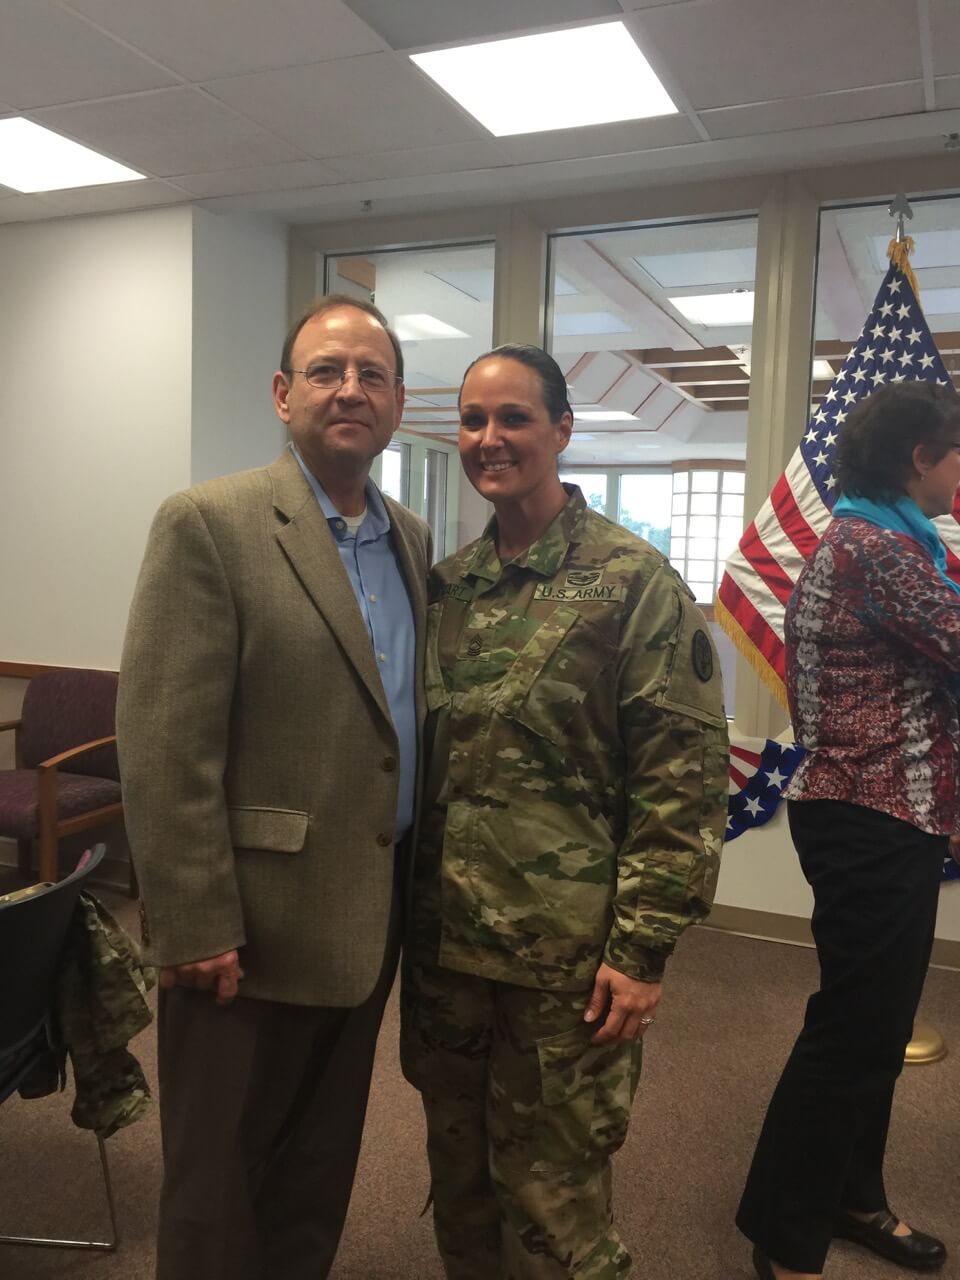 Gary with his daughter at her promotion to Master Sgt at Ft Btagg, NC